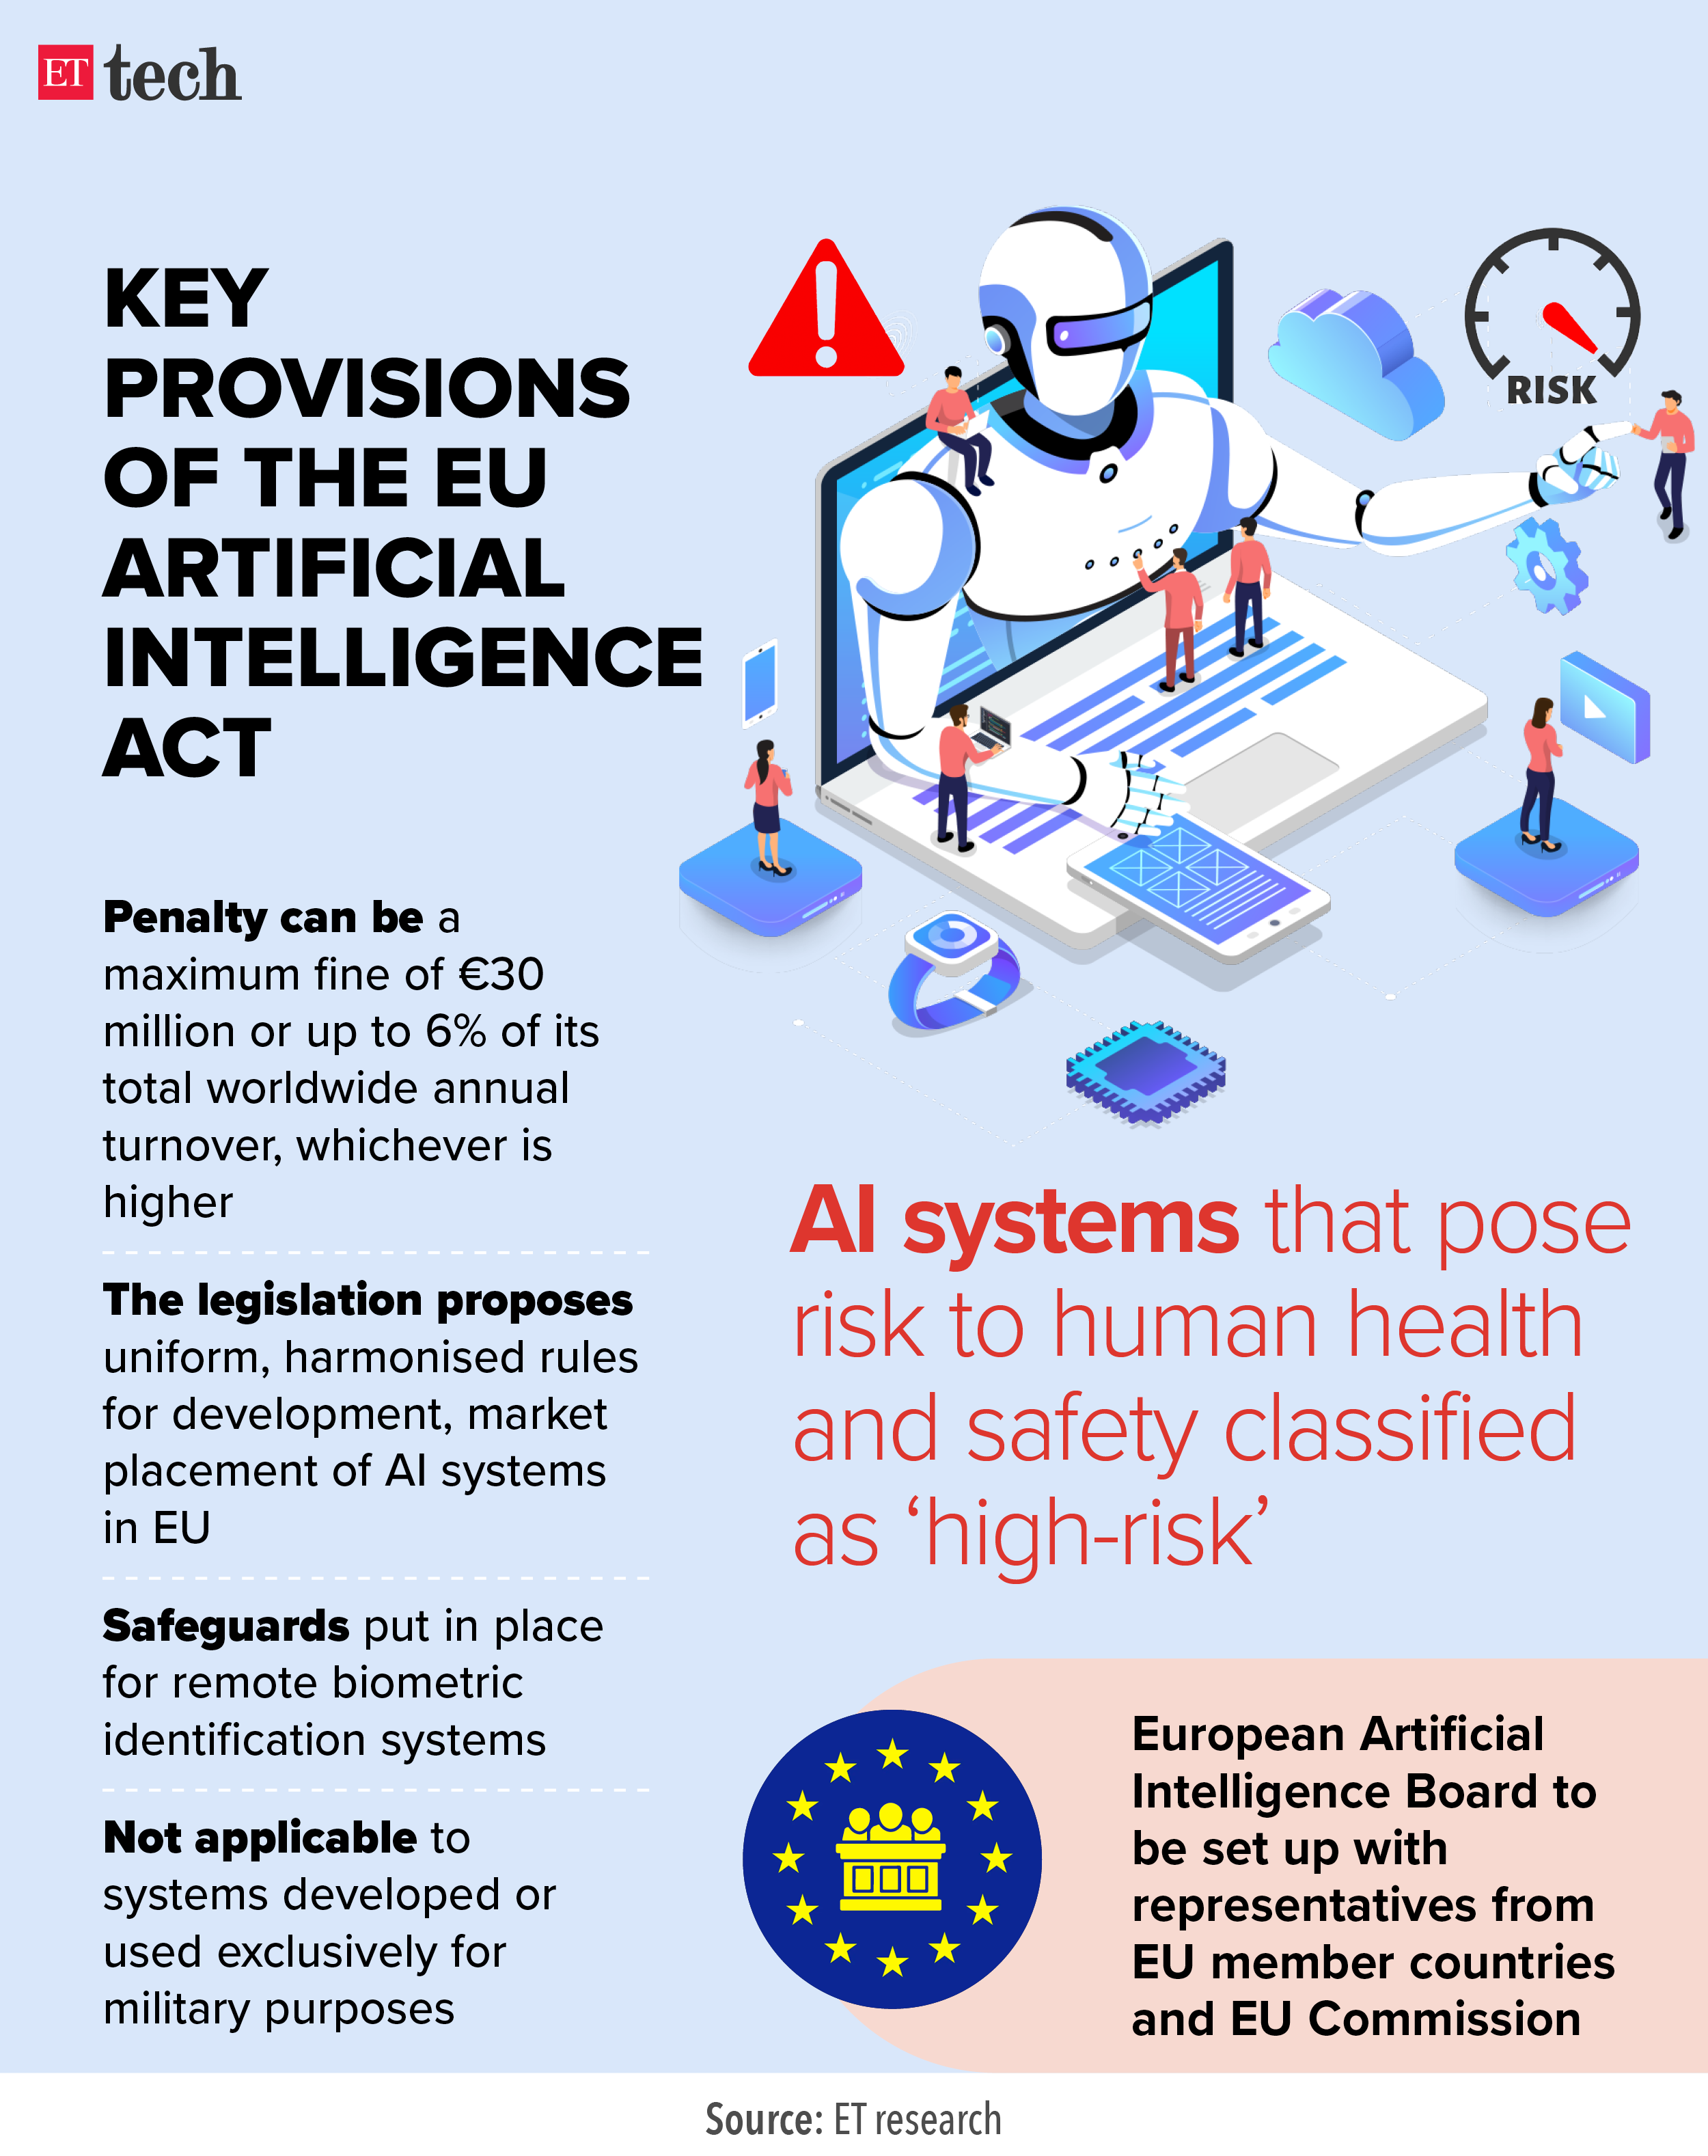 Key provisions of the EU Artificial Intelligence Act